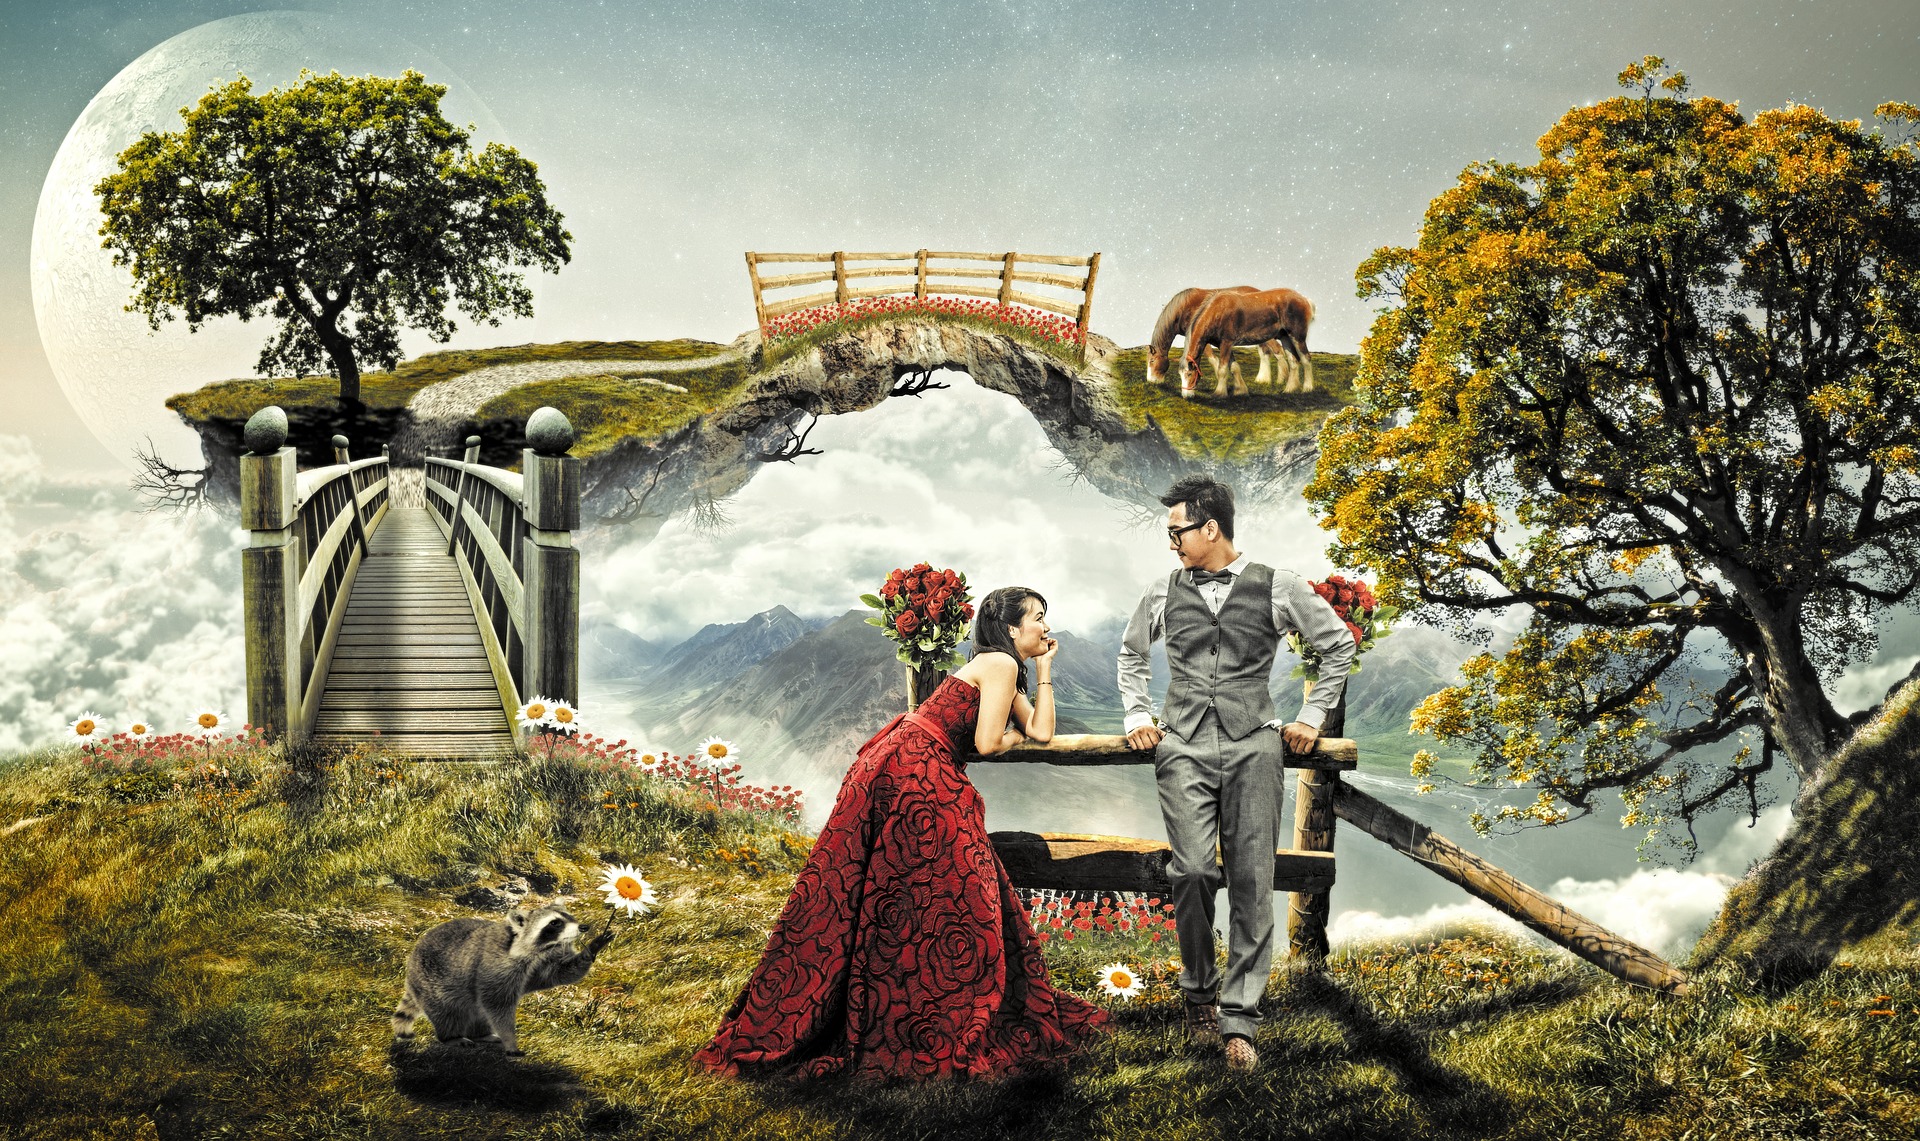 Couple in a fantasy dreamy magical landscape with trees and moon